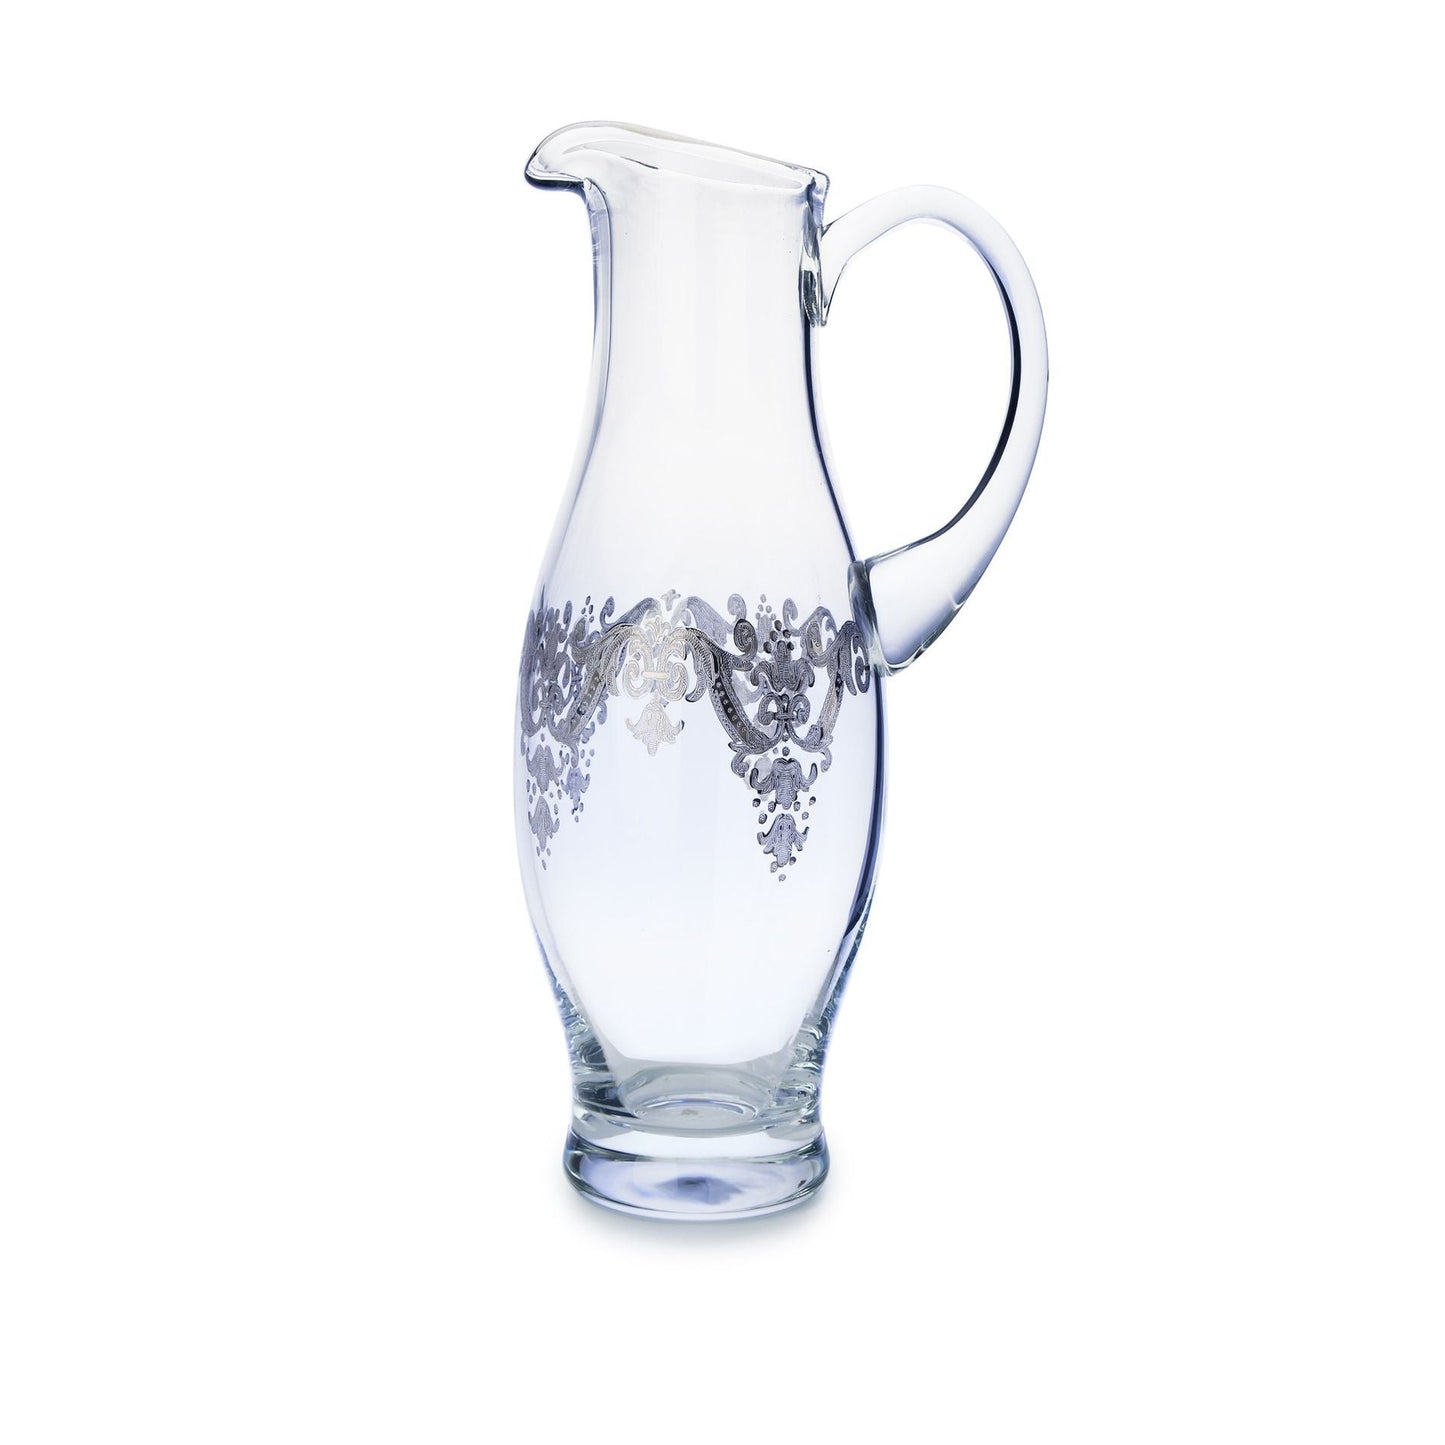 Classic Touch Decor Pitcher With Sterling Silver Arwork, Glass, 12"